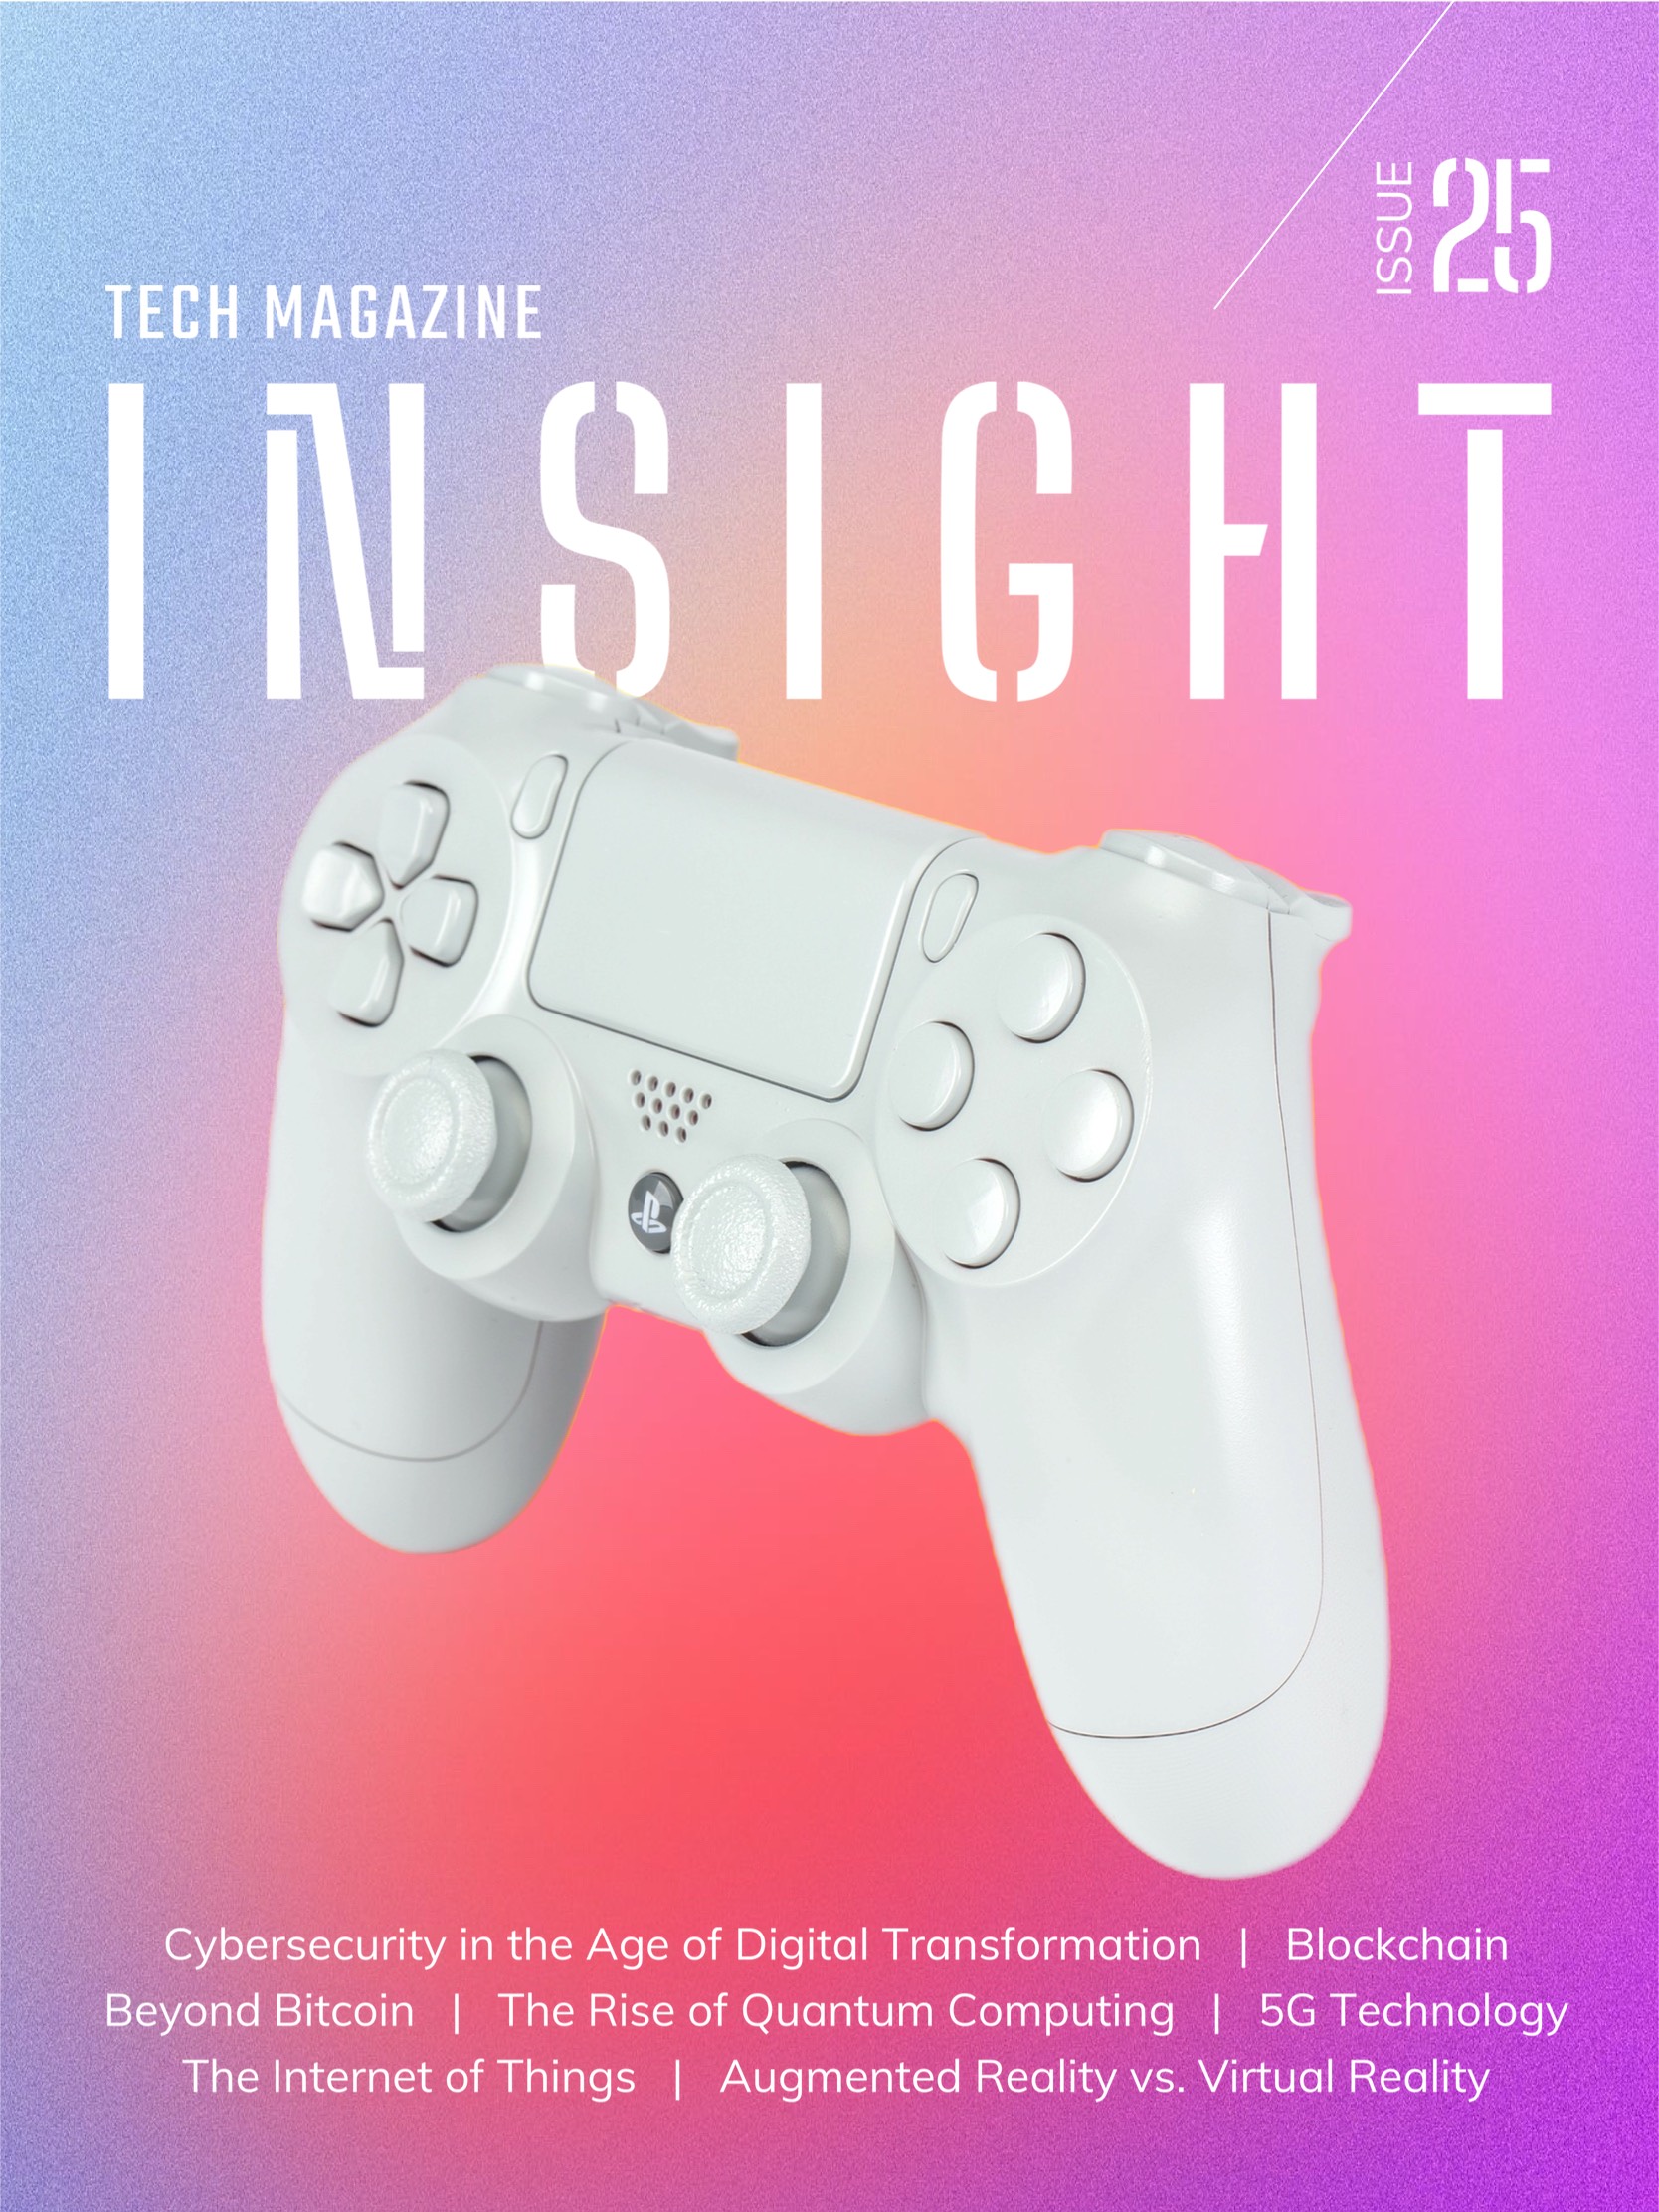 Gradient technology magazine magic cover template